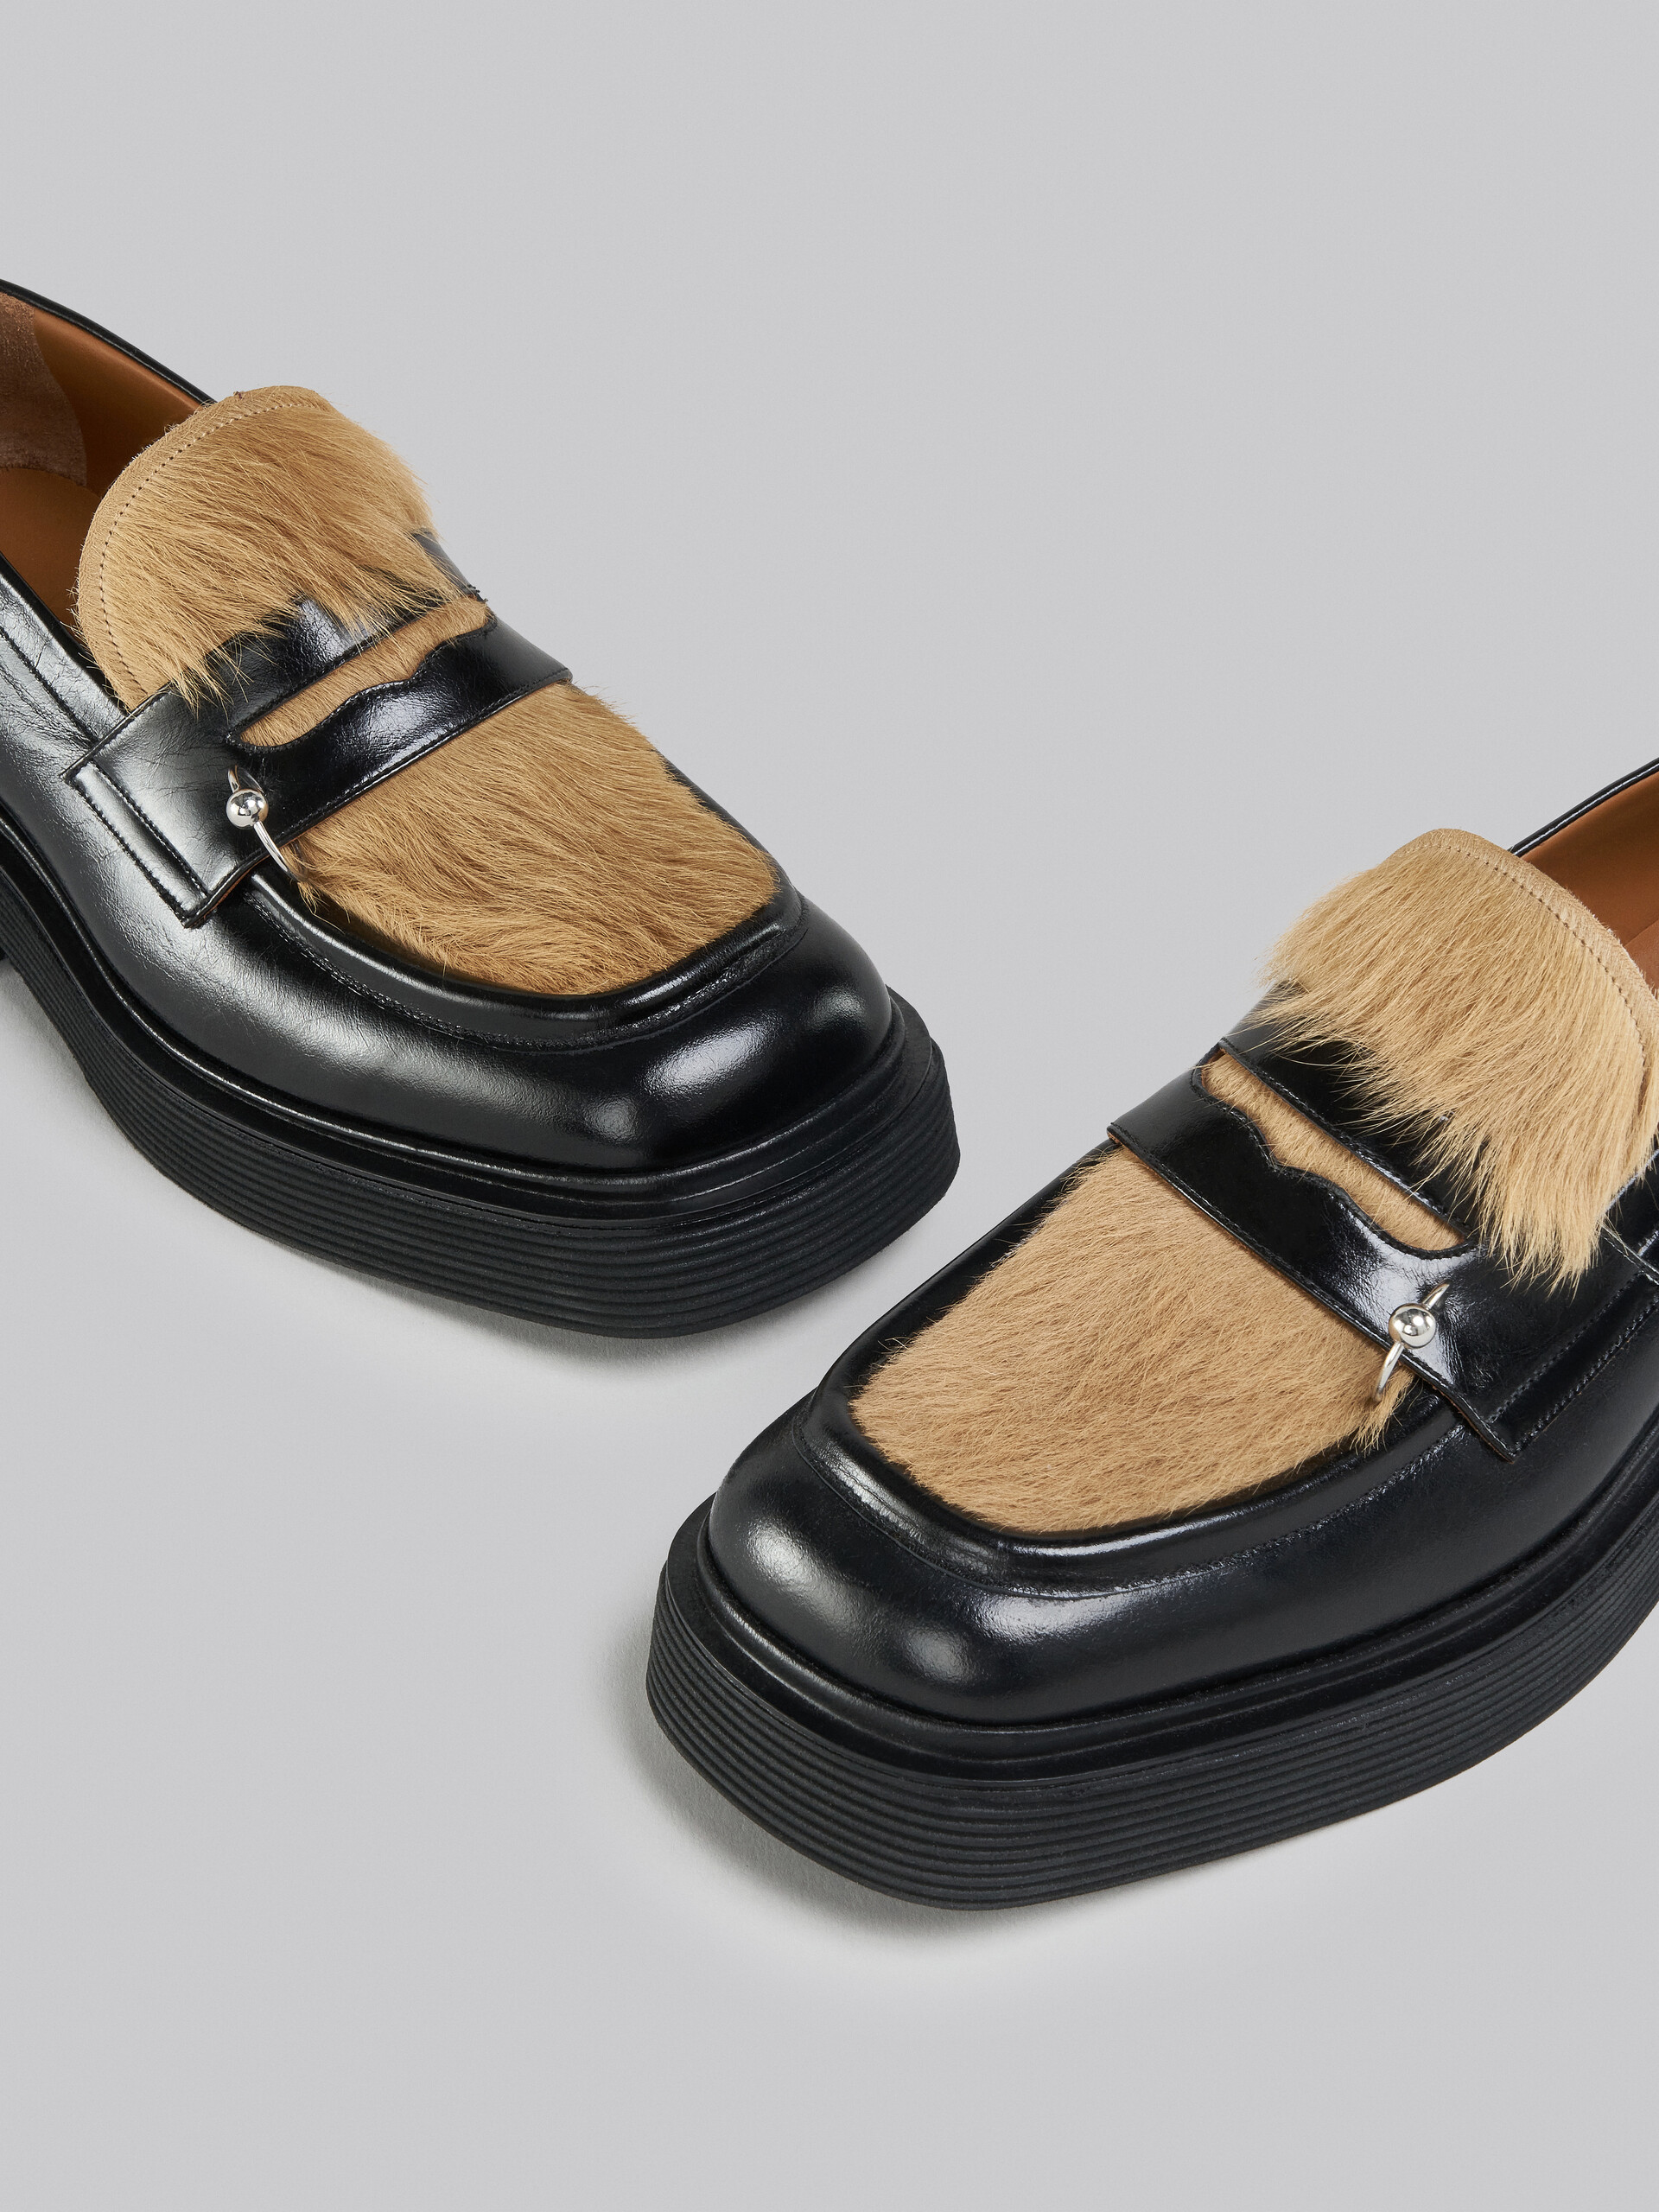 Black leather and beige long hair calfskin moccasin - Mocassin - Image 4